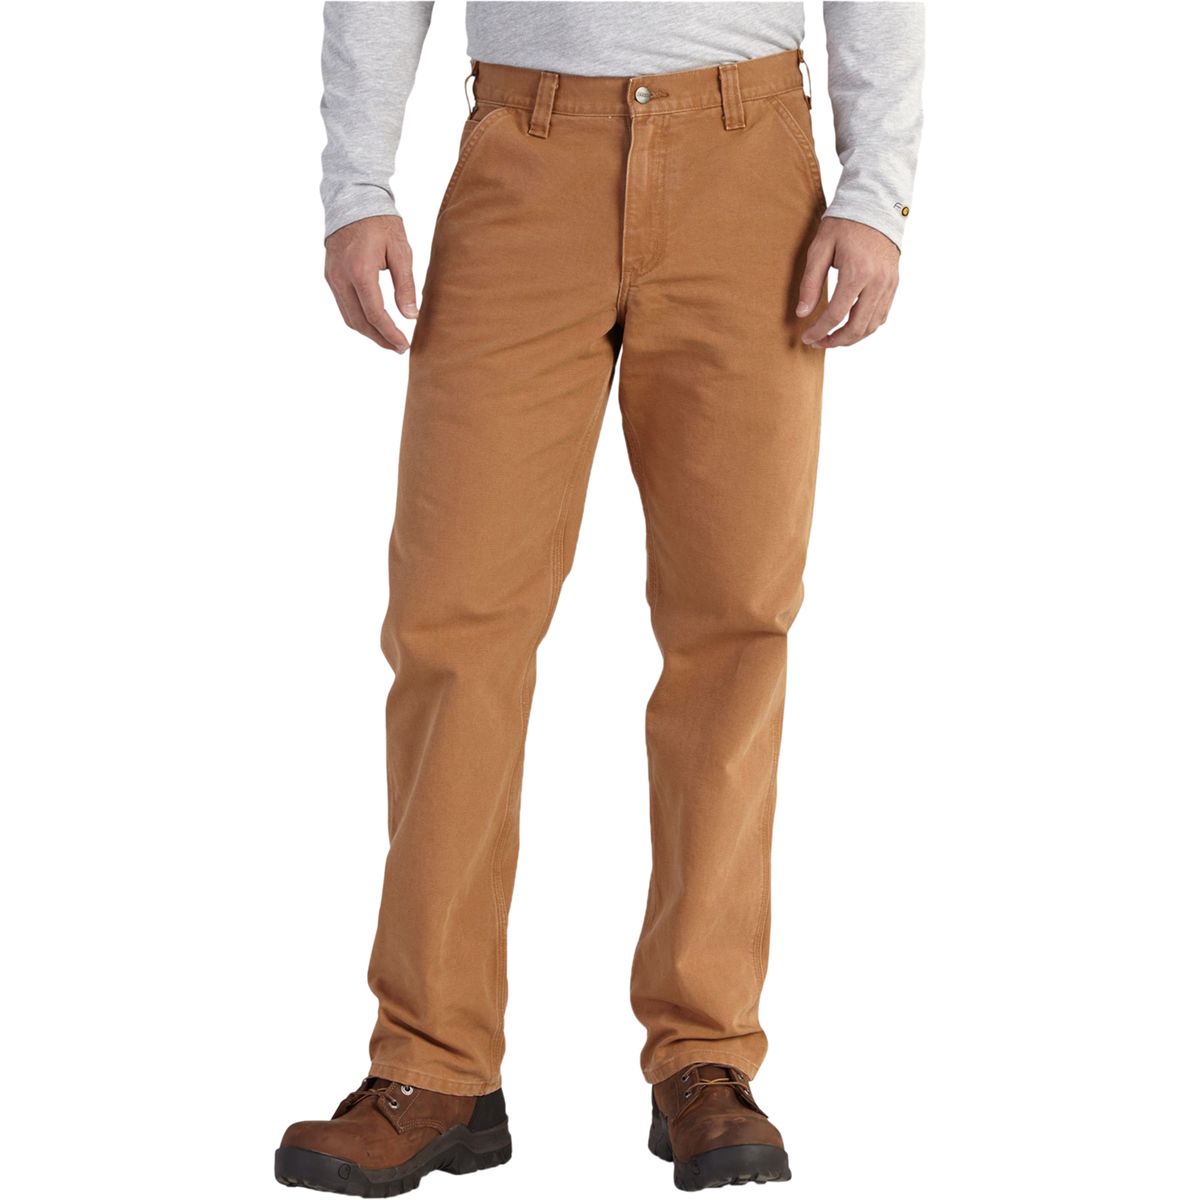 Carhartt Washed Duck Relaxed Dungaree Pant - Men's | Backcountry.com